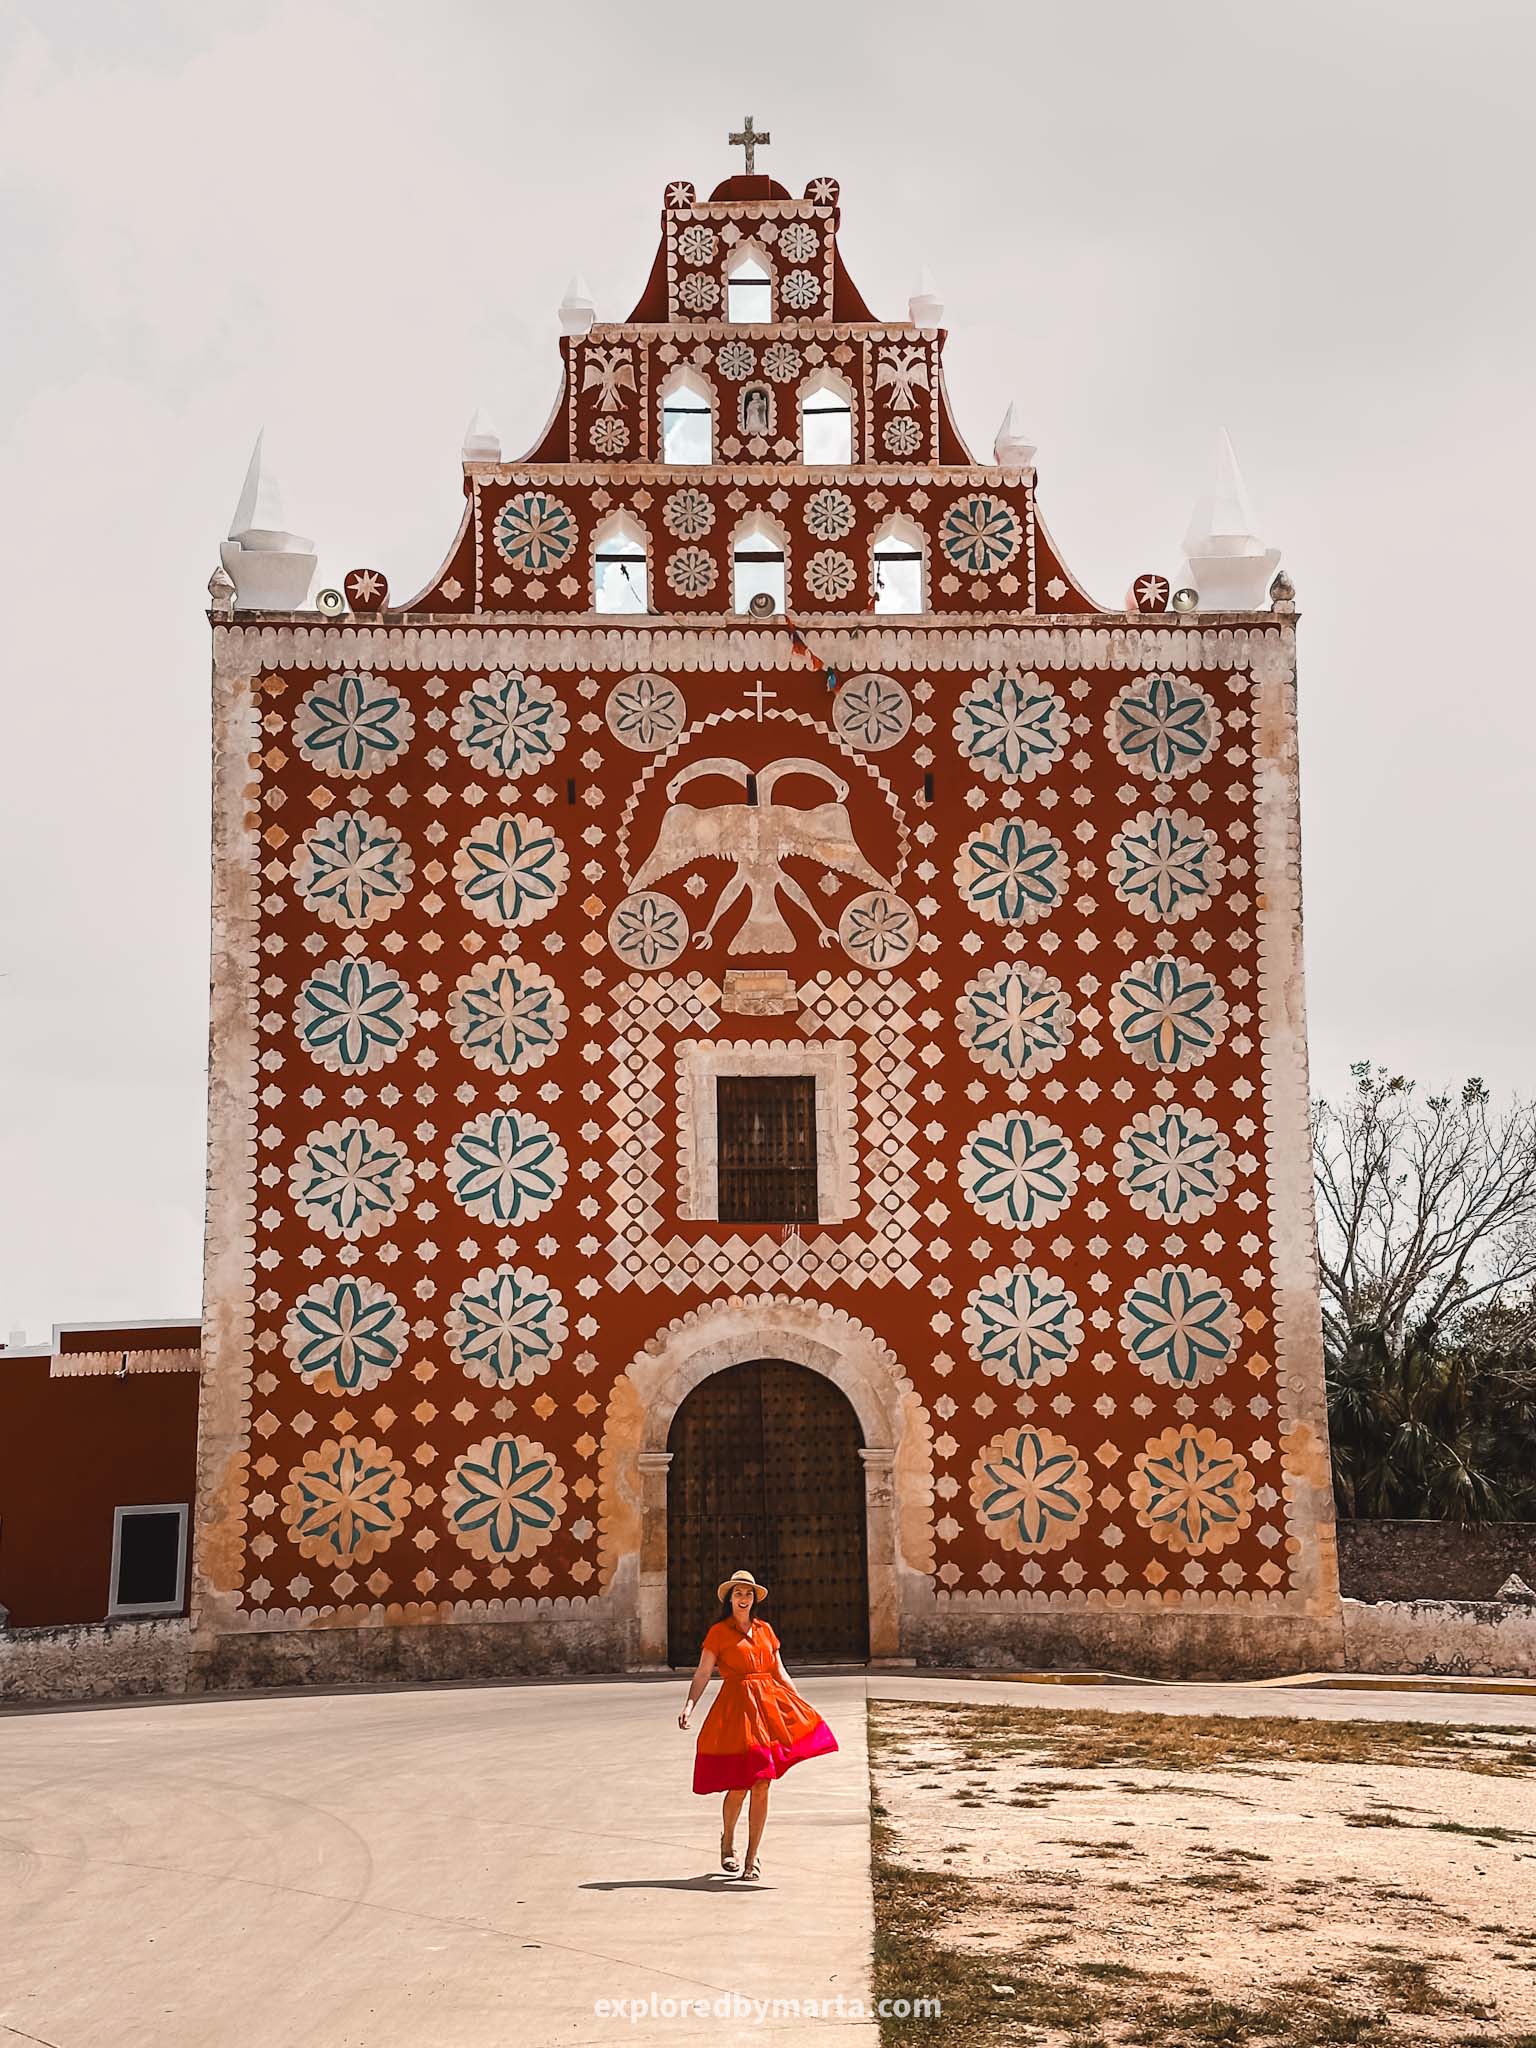 Iglesia de Uayma church is a red colored church with large white roses in Uayma town in the Yucatan Peninsula, Mexico also known as ex-convent of Santo Domingo